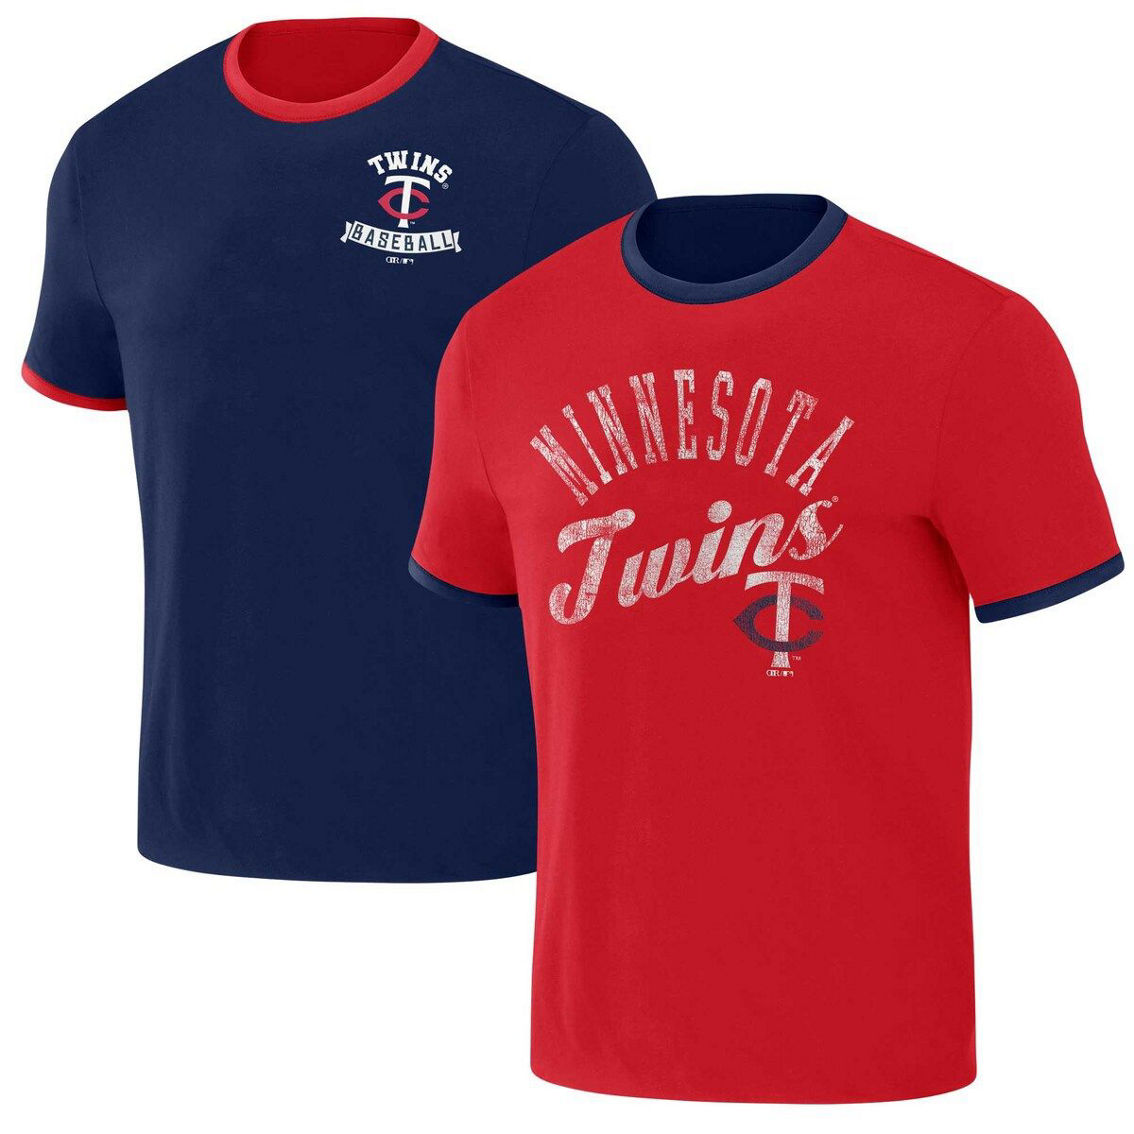 Darius Rucker Collection by Fanatics Men's Darius Rucker Collection by Fanatics Navy/Red Minnesota Twins Two-Way Ringer Reversible T-Shirt - Image 2 of 4